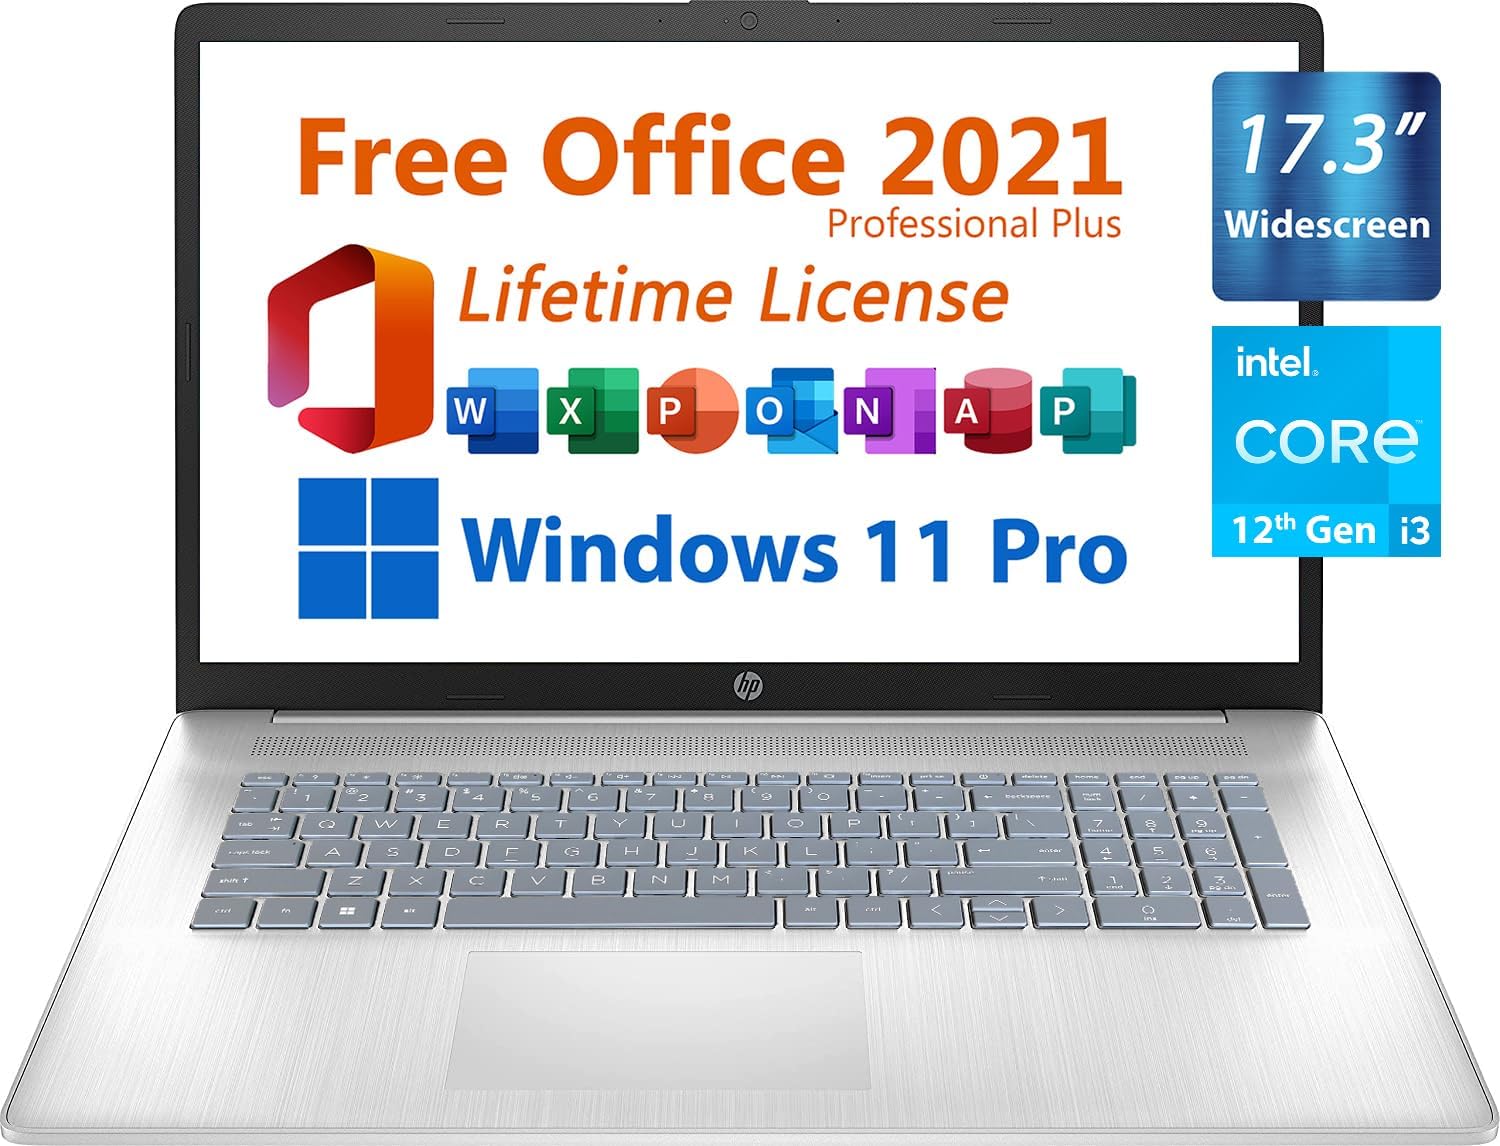 HP 17.3" Business Laptop, Free Microsoft Office 2021 with Lifetime License, Widescreen FHD 1920x1080 Display, Intel 6-Core i3-1215U 4.4 GHz, 32GB DDR4, 1TB SSD, 6 Hours Battery, Windows 11 Pro